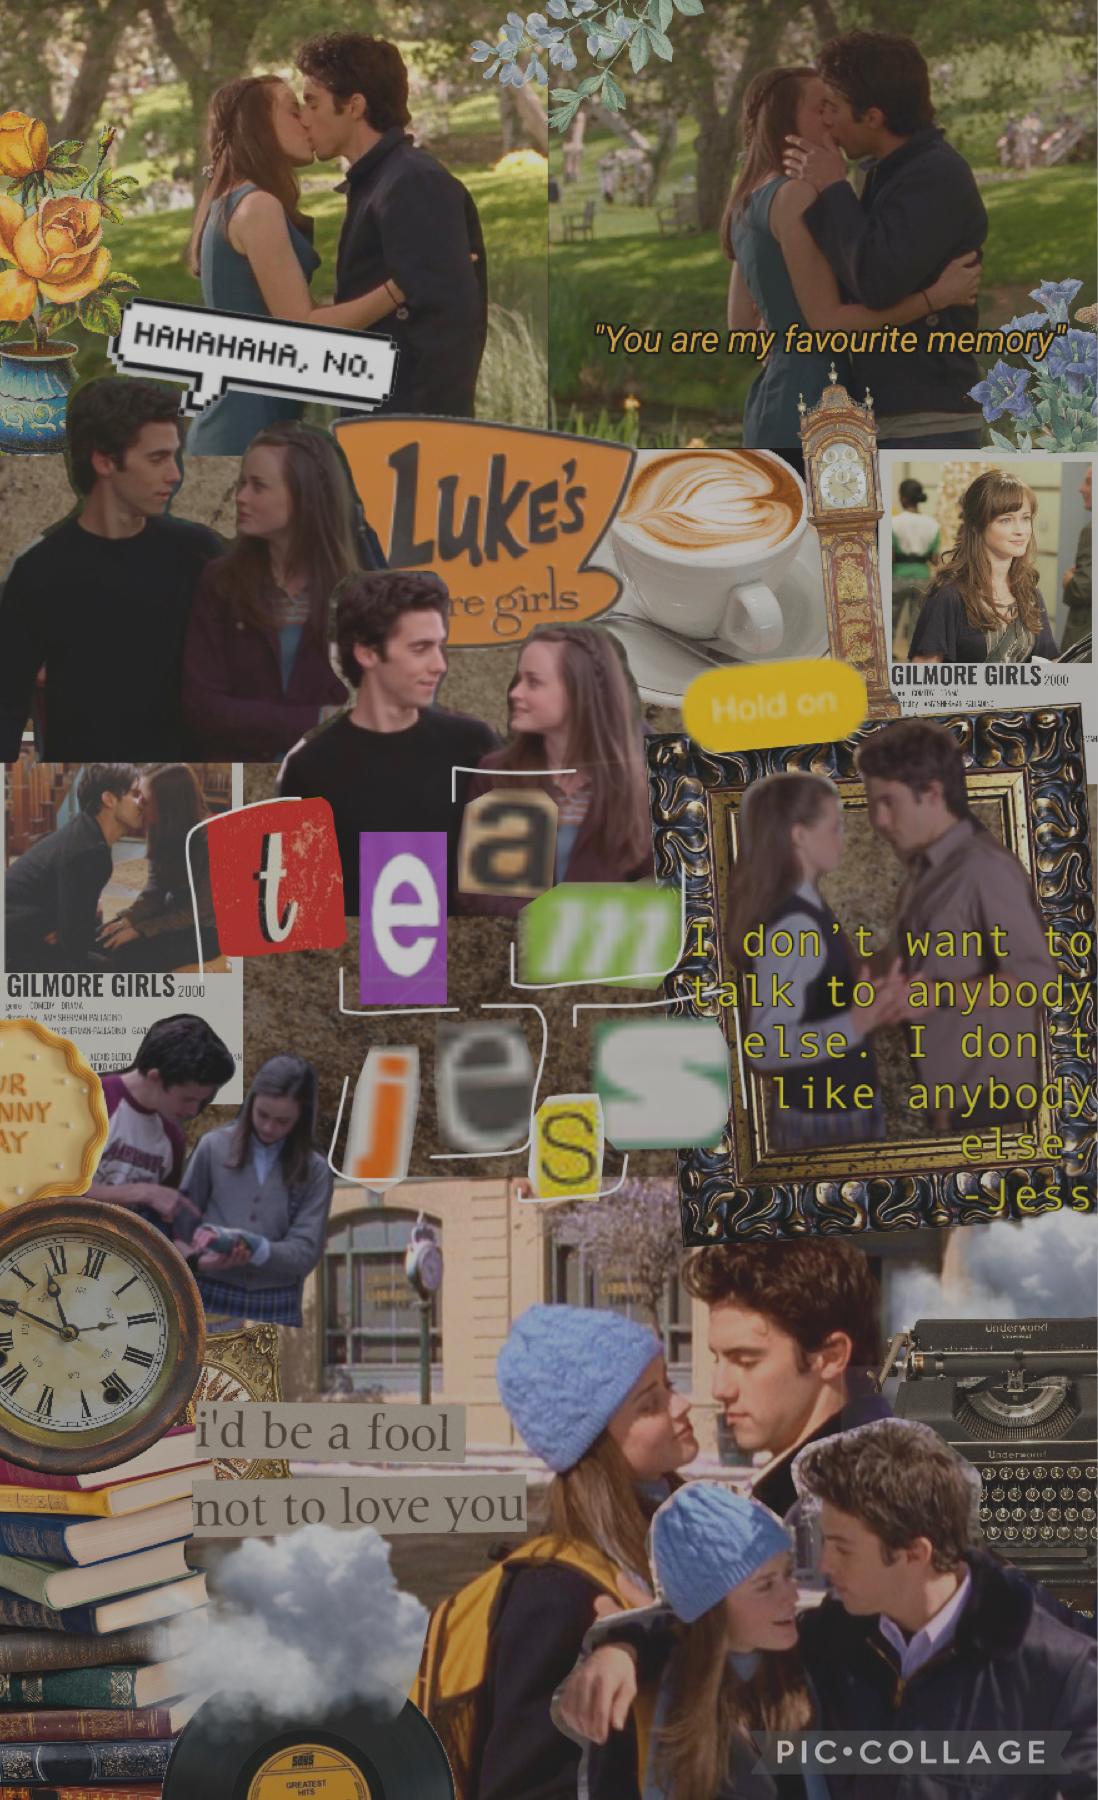 Hello! Tap all Gilmore girls fans ✨ ☕️ ☕️ 

Q: team Jess or dean
(I wanna hear your answers :D )

A: Jess ftw, can’t change my mind!